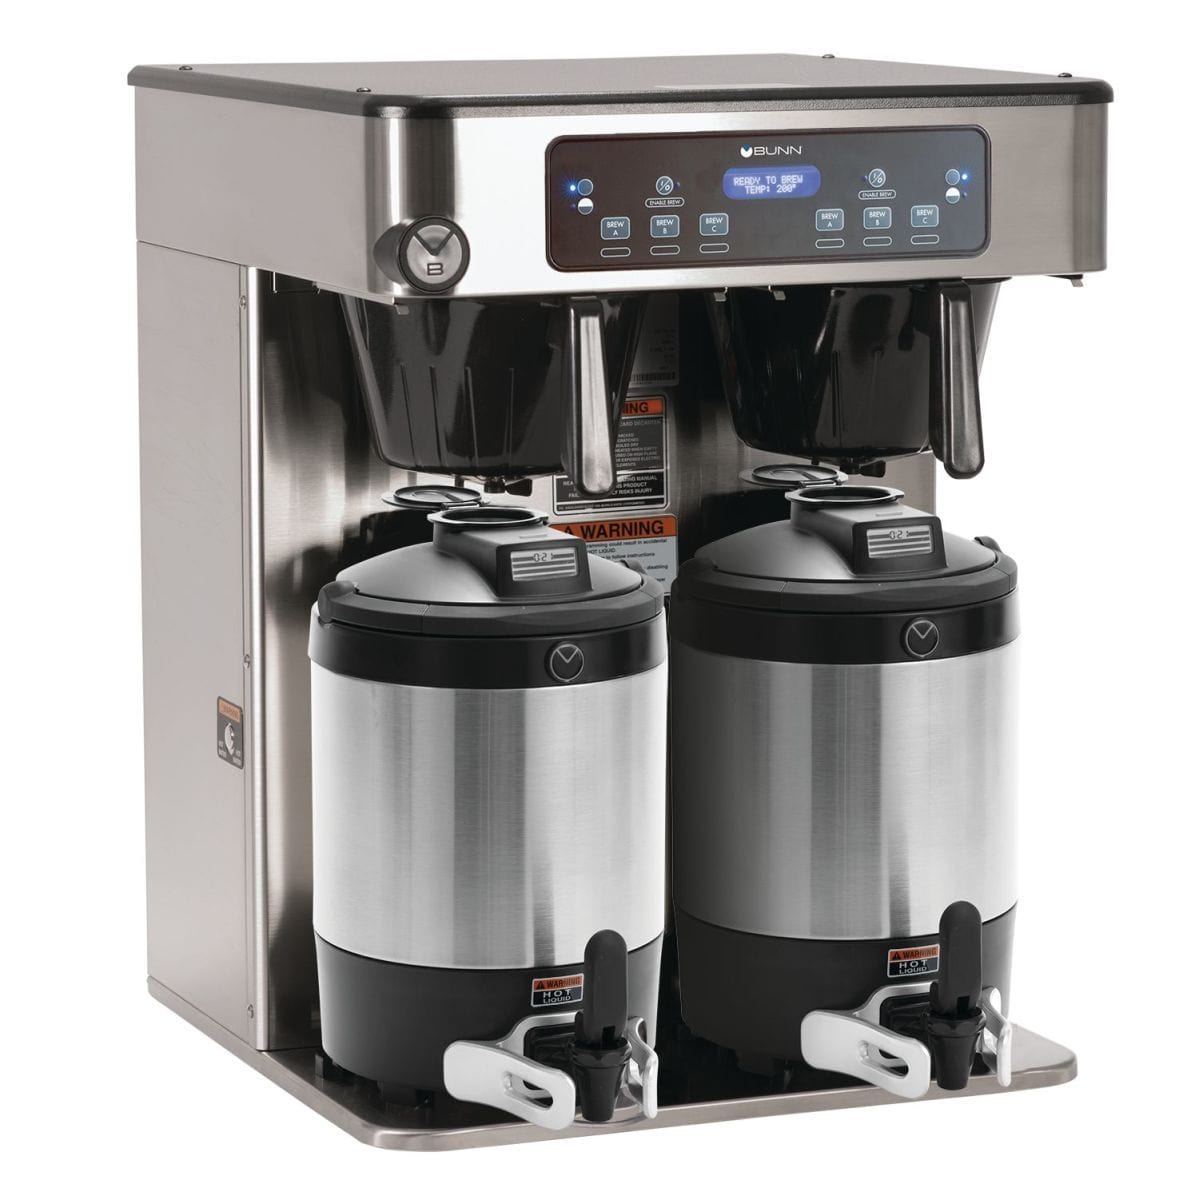 Bunn JDF-2S Silver Series 2 Flavor Beverage System, Lit Door, Iced Coffee Display, 120V, 2 Flavors, Push Button Operation Iced Coffee Machine